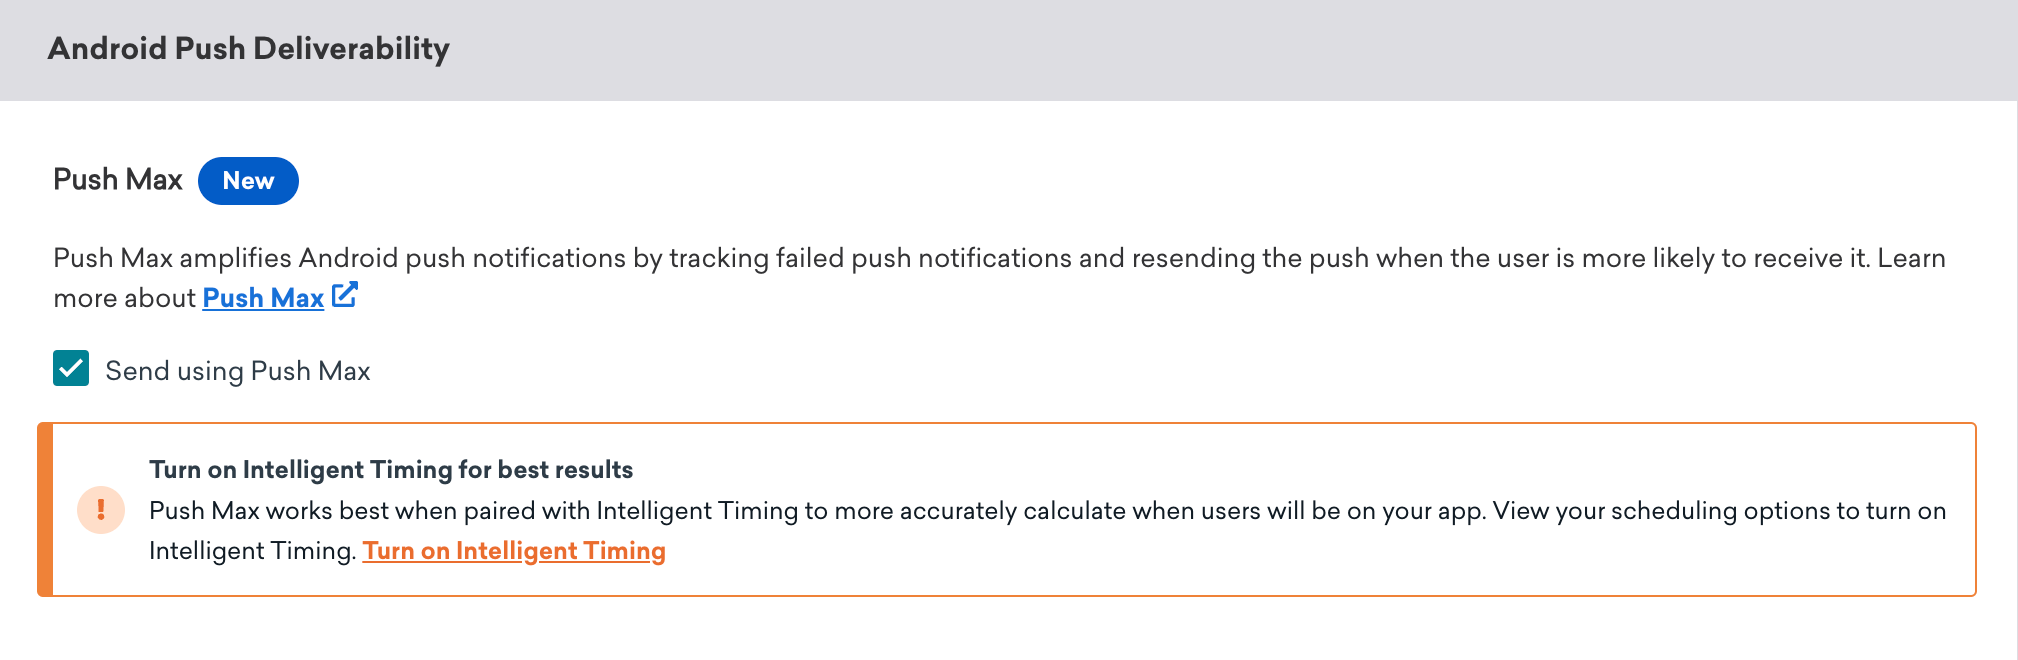 Android Push Deliverability section of the Schedule Delivery step with the option to "Send using Push Max".